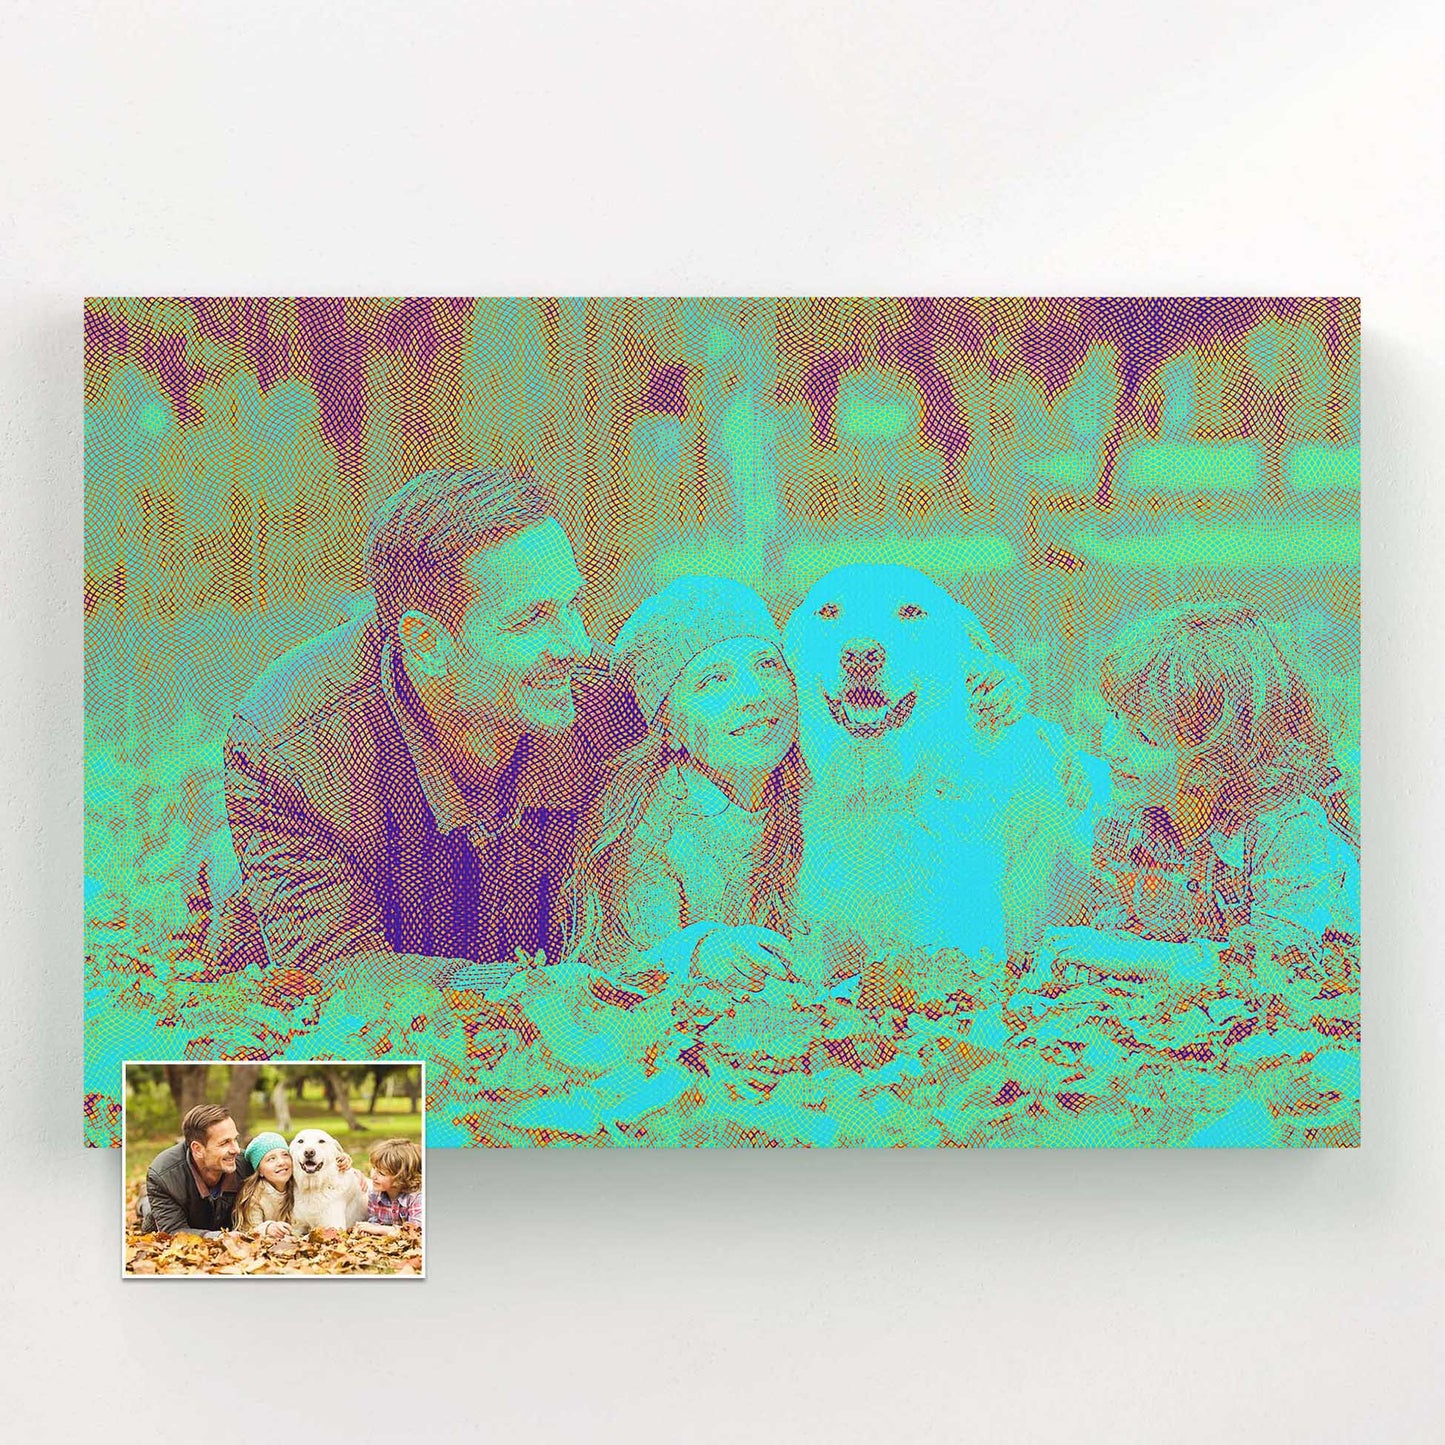 Celebrate your special moments with our Blue Engraved Canvas, a personalized masterpiece that brings joy and inspiration to any space. This painting from photo captures the essence of your memories in a fun and cool way